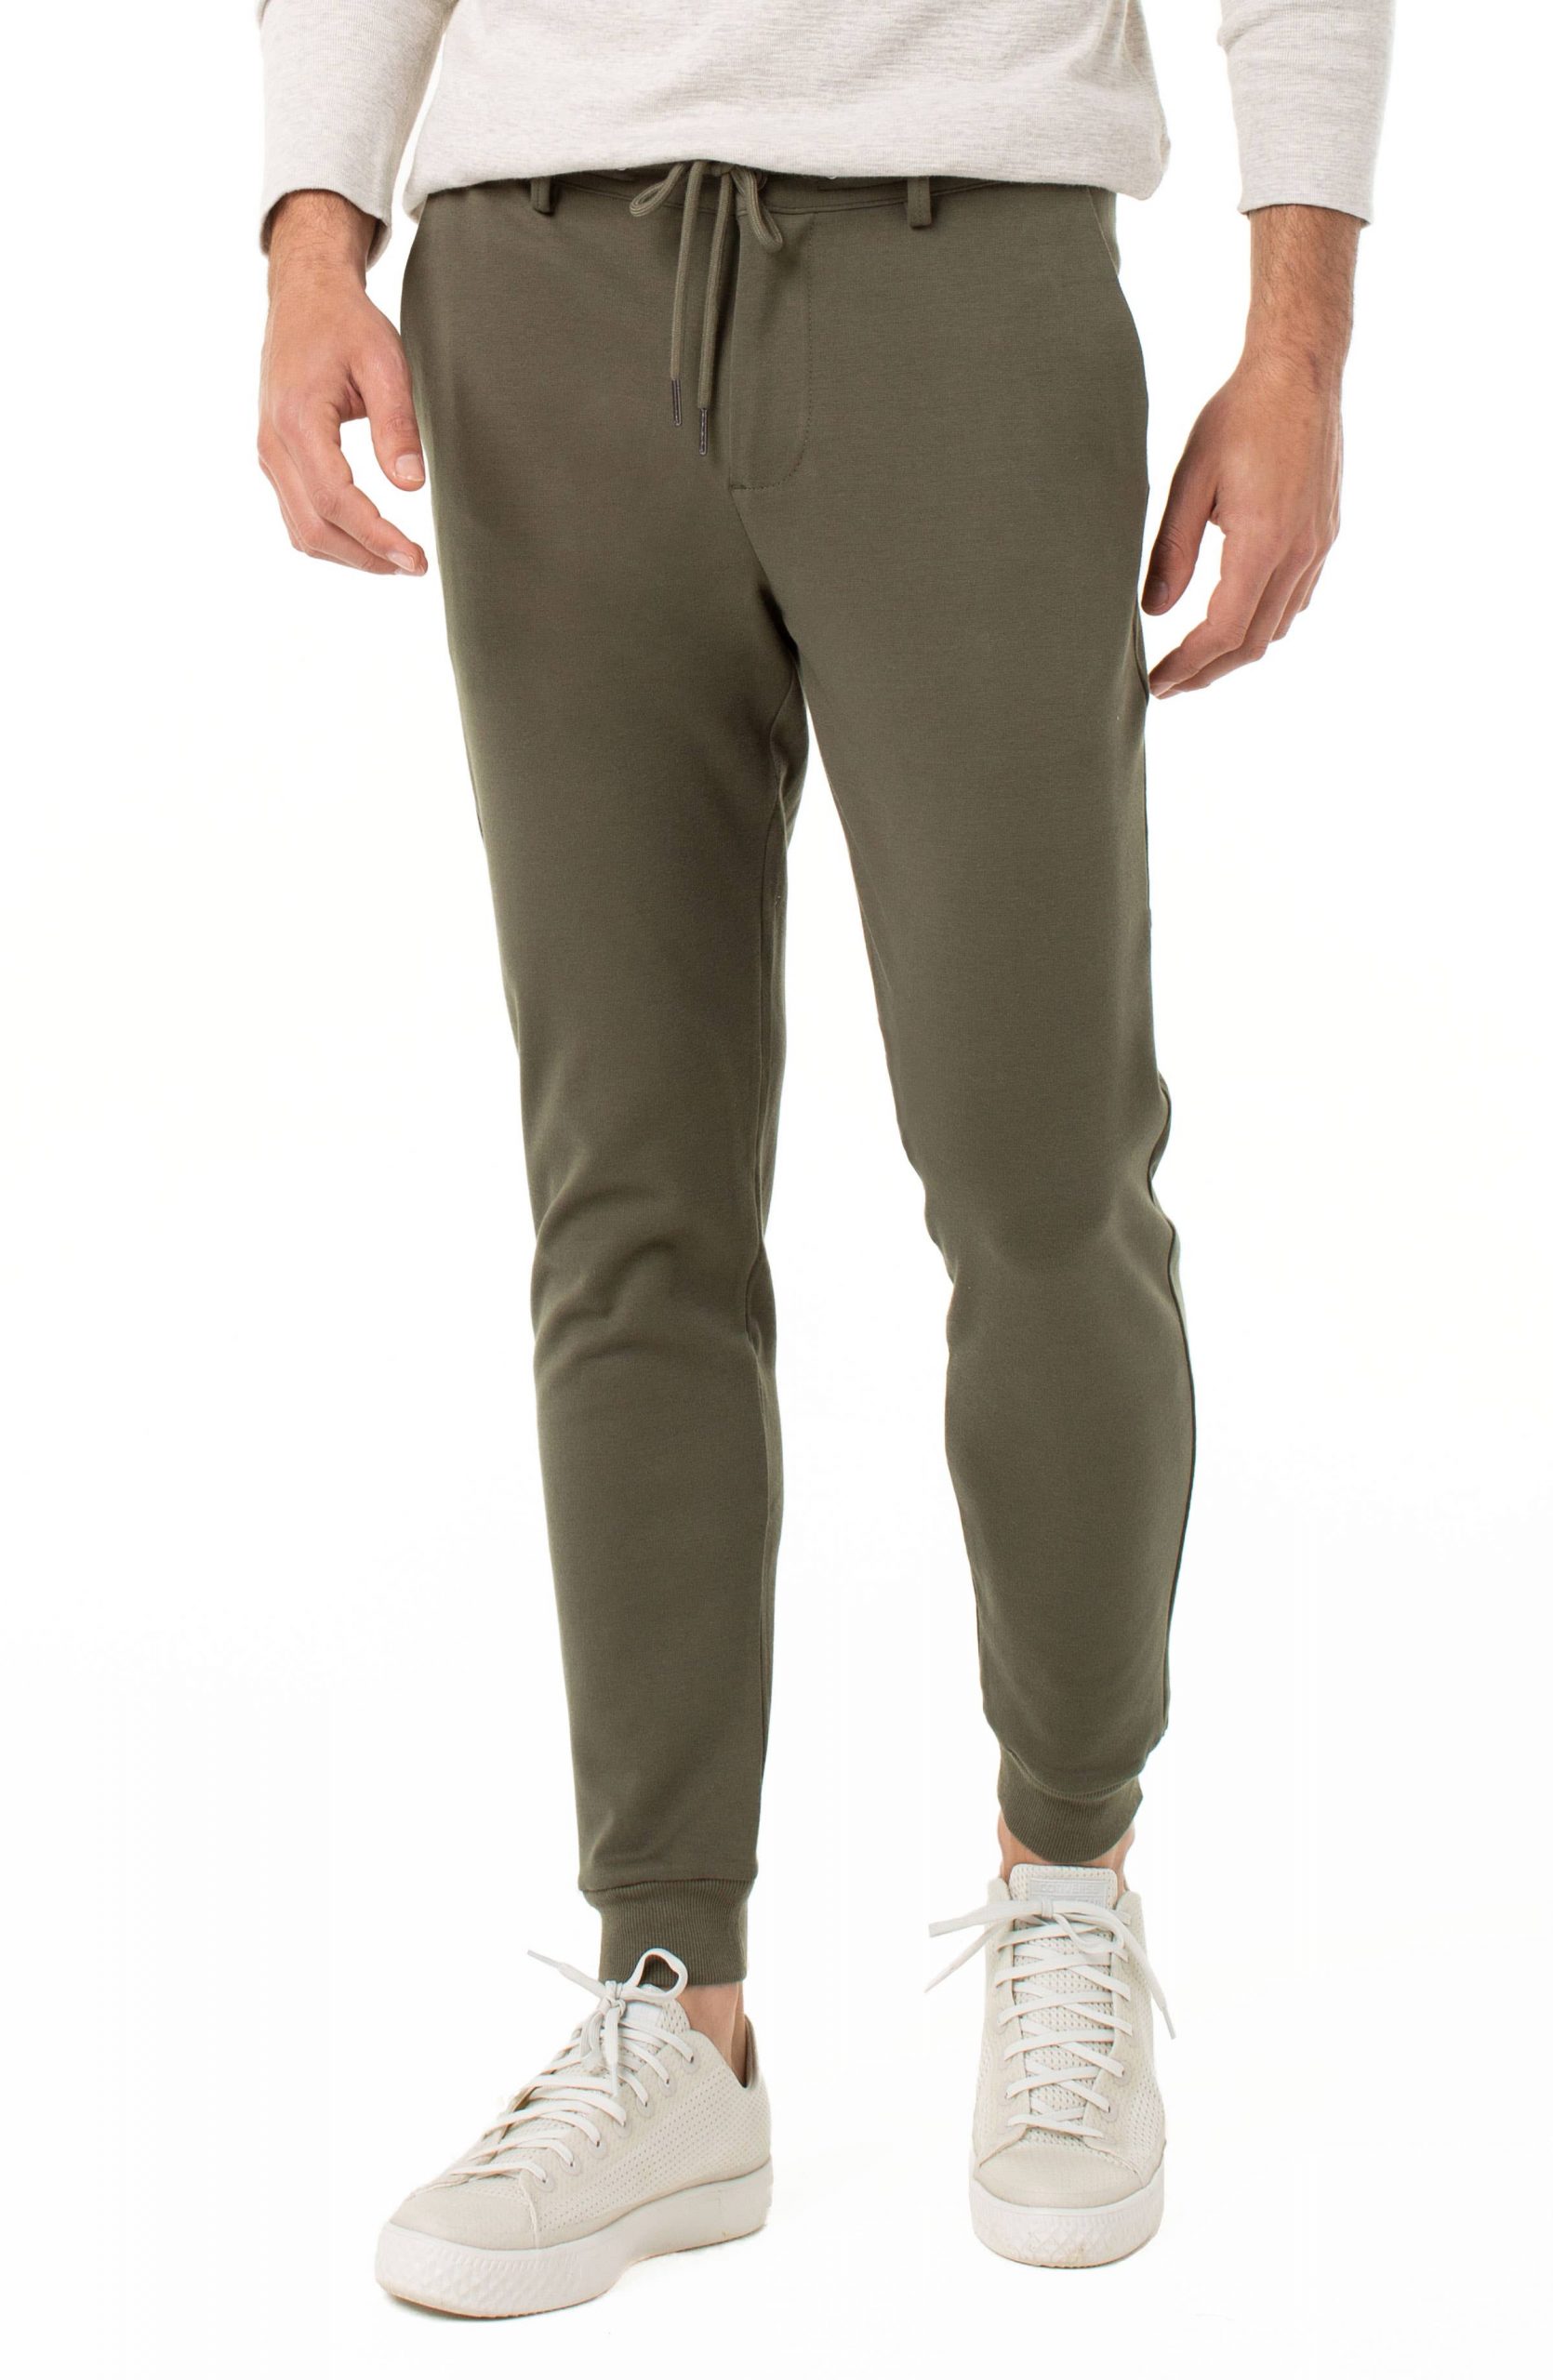 Olive Jogger Pants – Ande Andrea